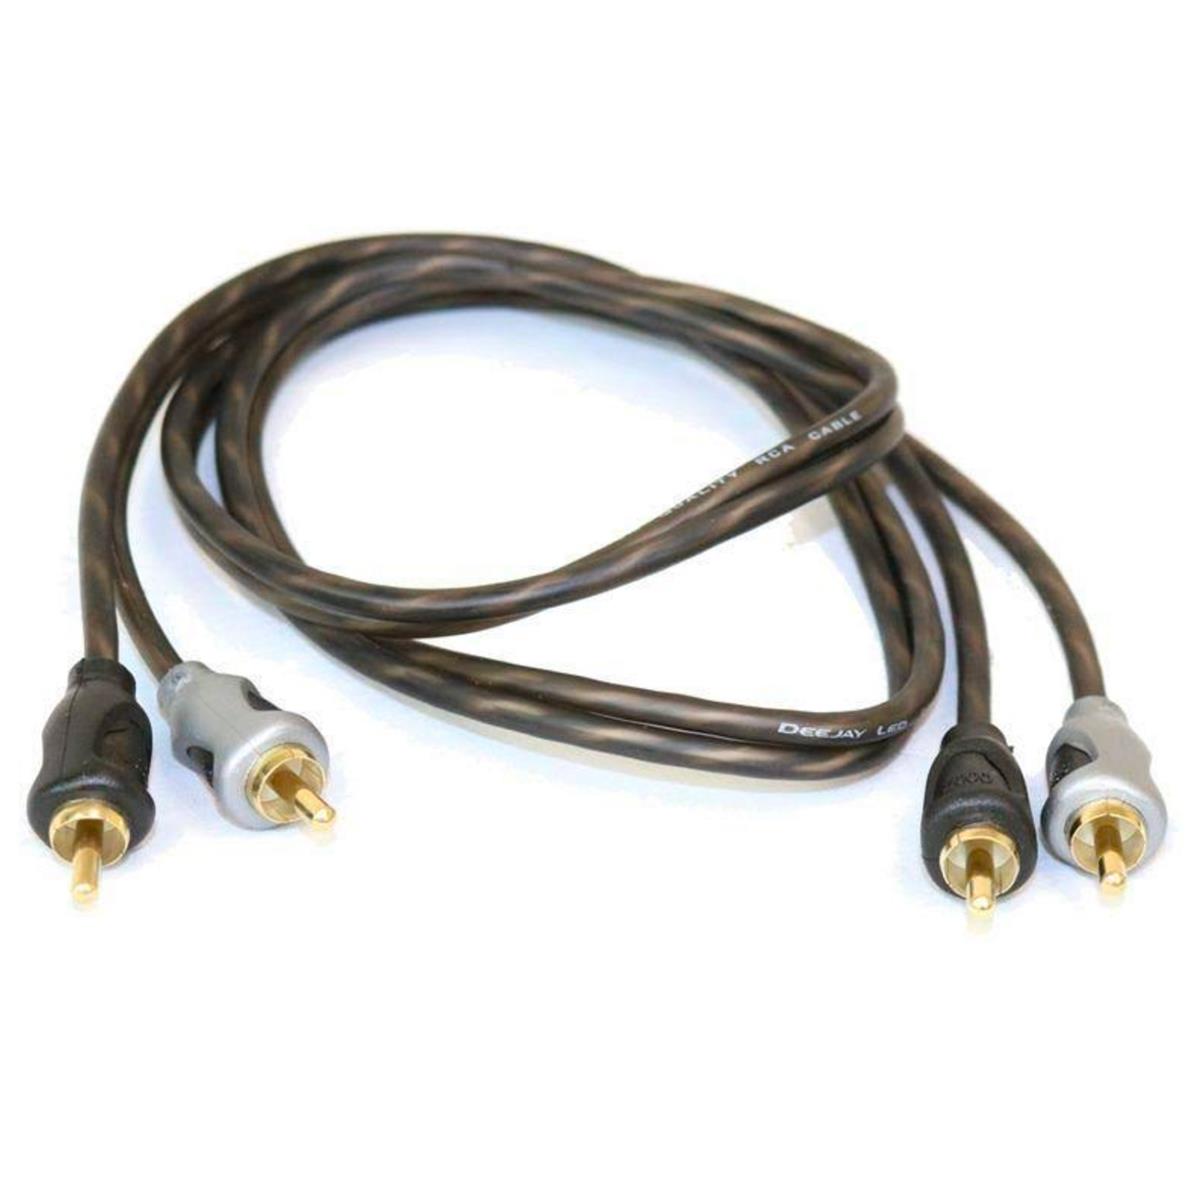 Image of Deejay LED 17' RCA to RCA Copper Audio Cable